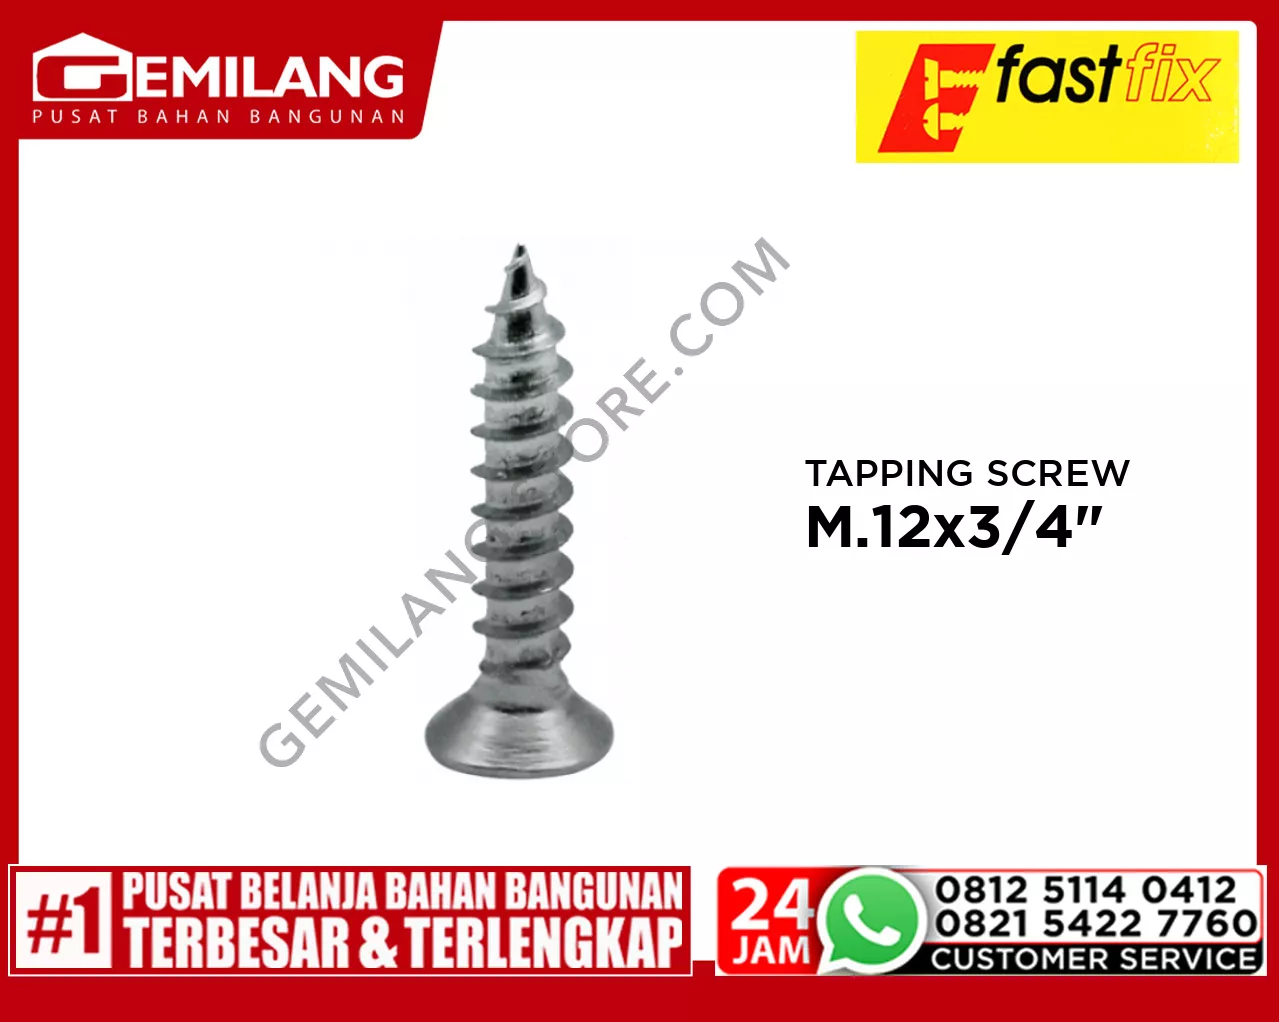 CSK TAPPING SCREW M.12 x 3/4inch 12pc